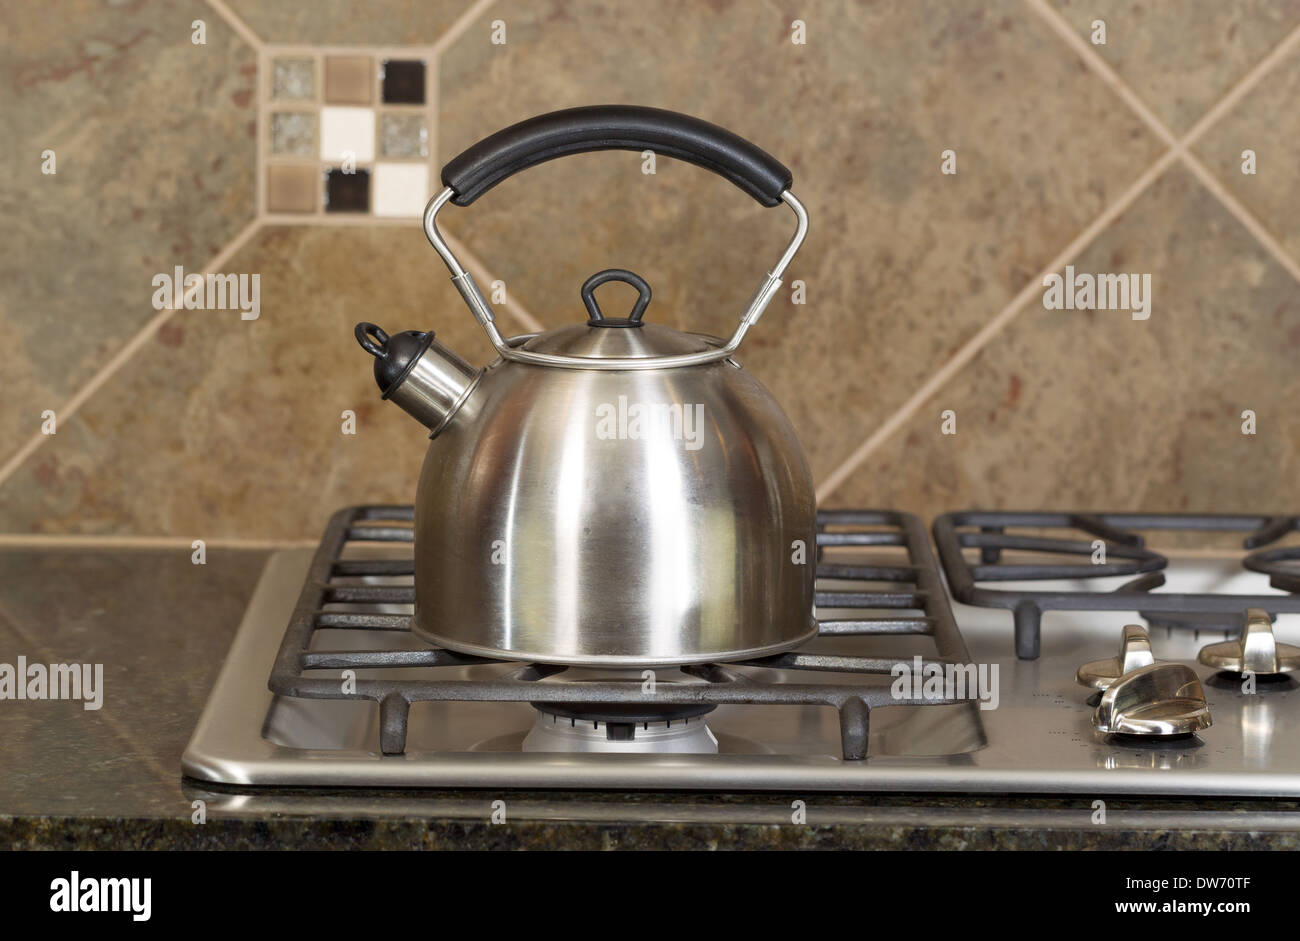 Horizontal photo of a stainless steel tea pot on stove top with stone counter tops and tile back splash Stock Photo